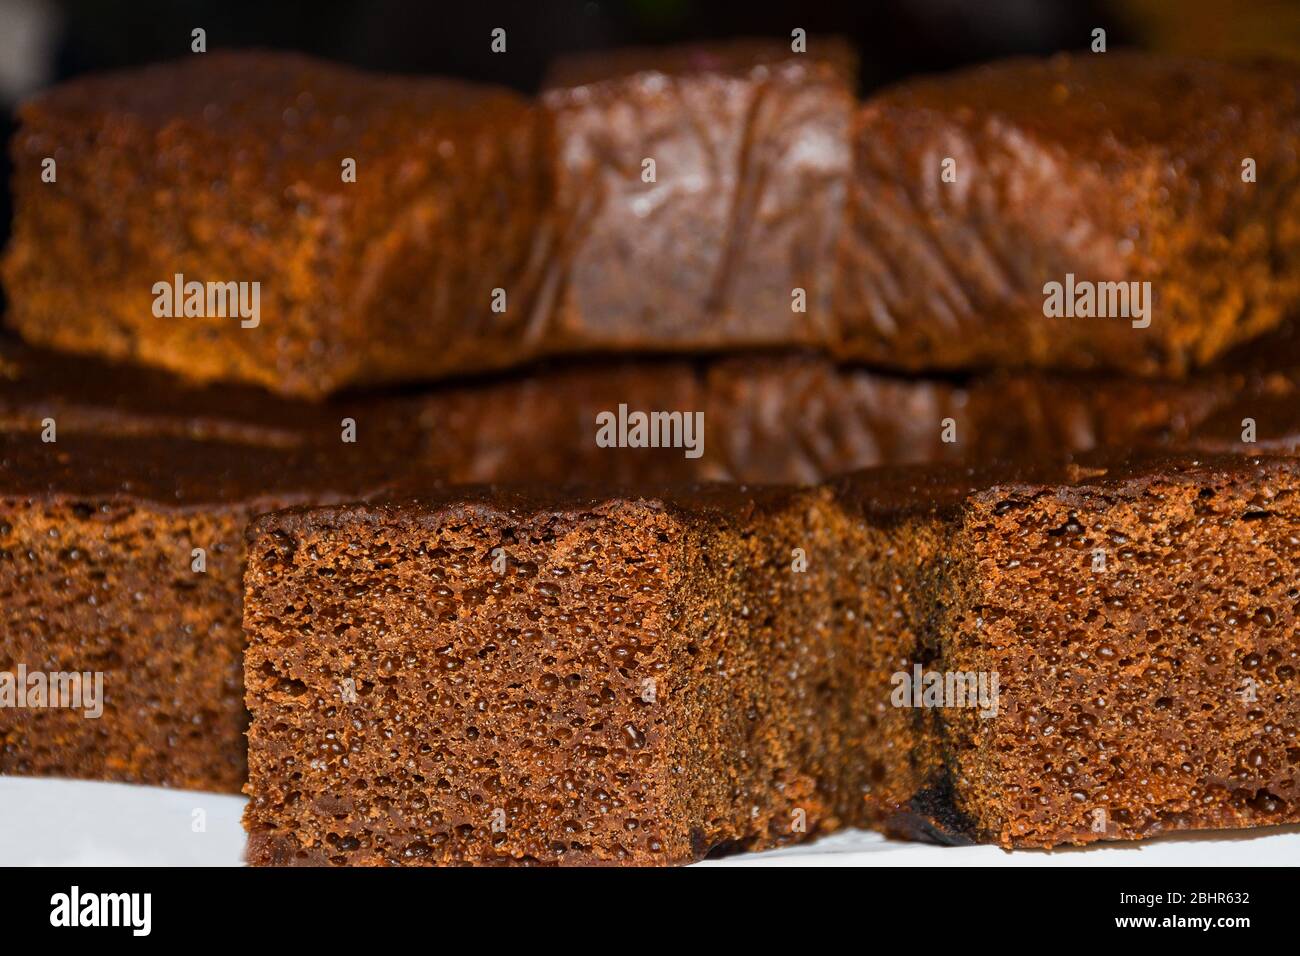 Bakery Display Brownie High Resolution Stock Photography And Images Alamy